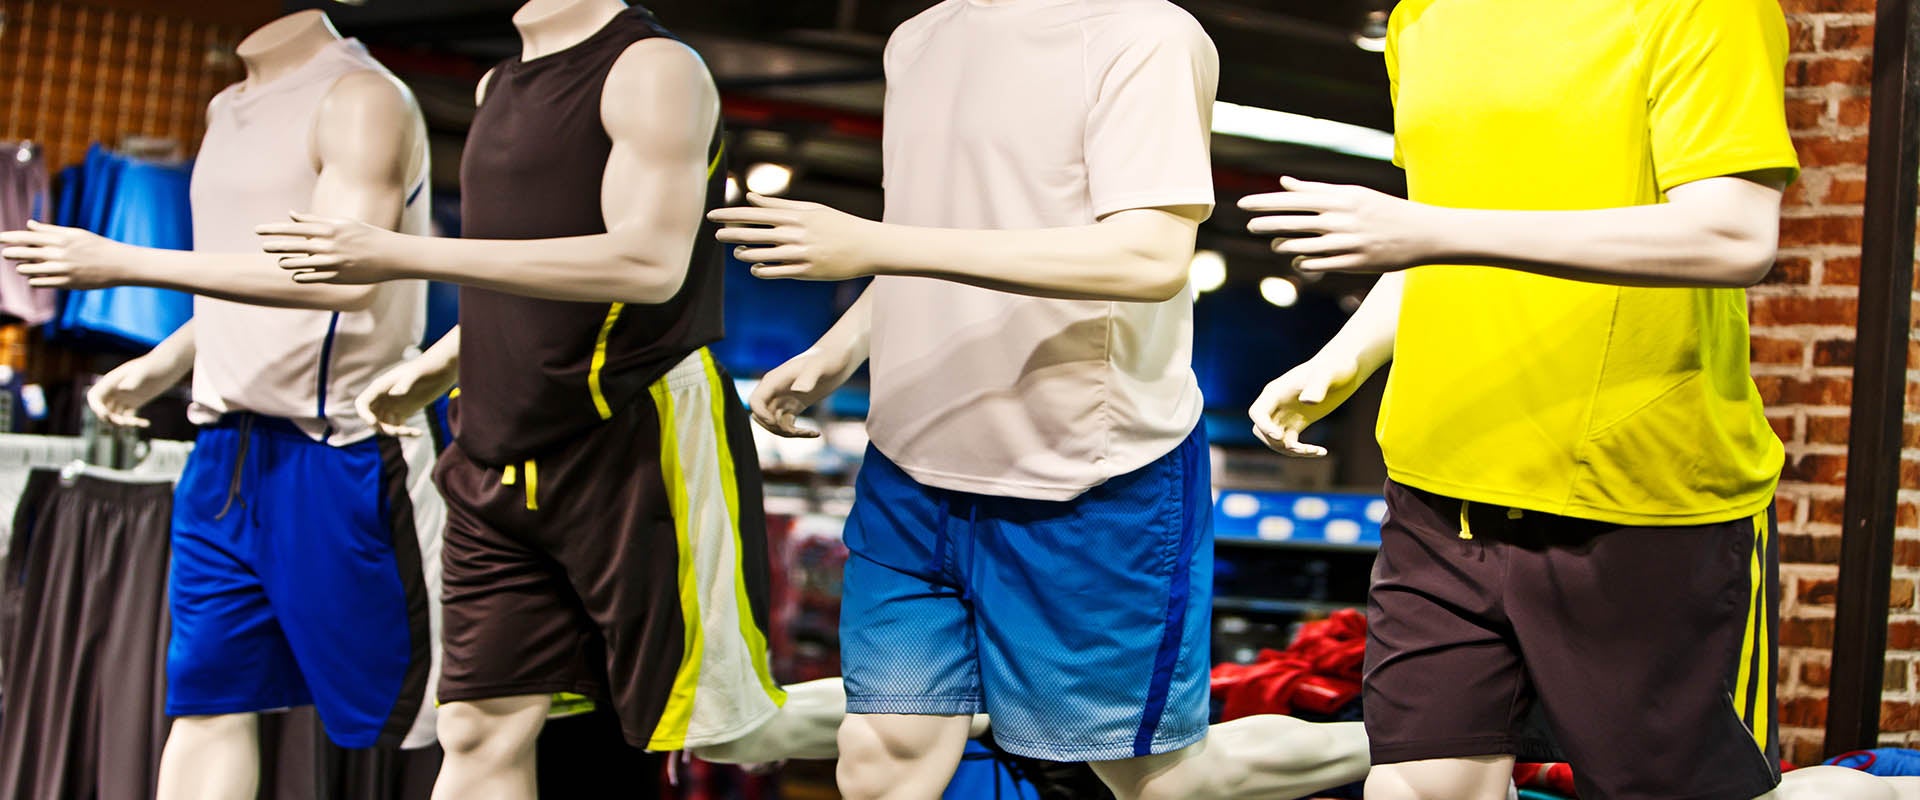 enhanced sales visibility for sports apparel brand